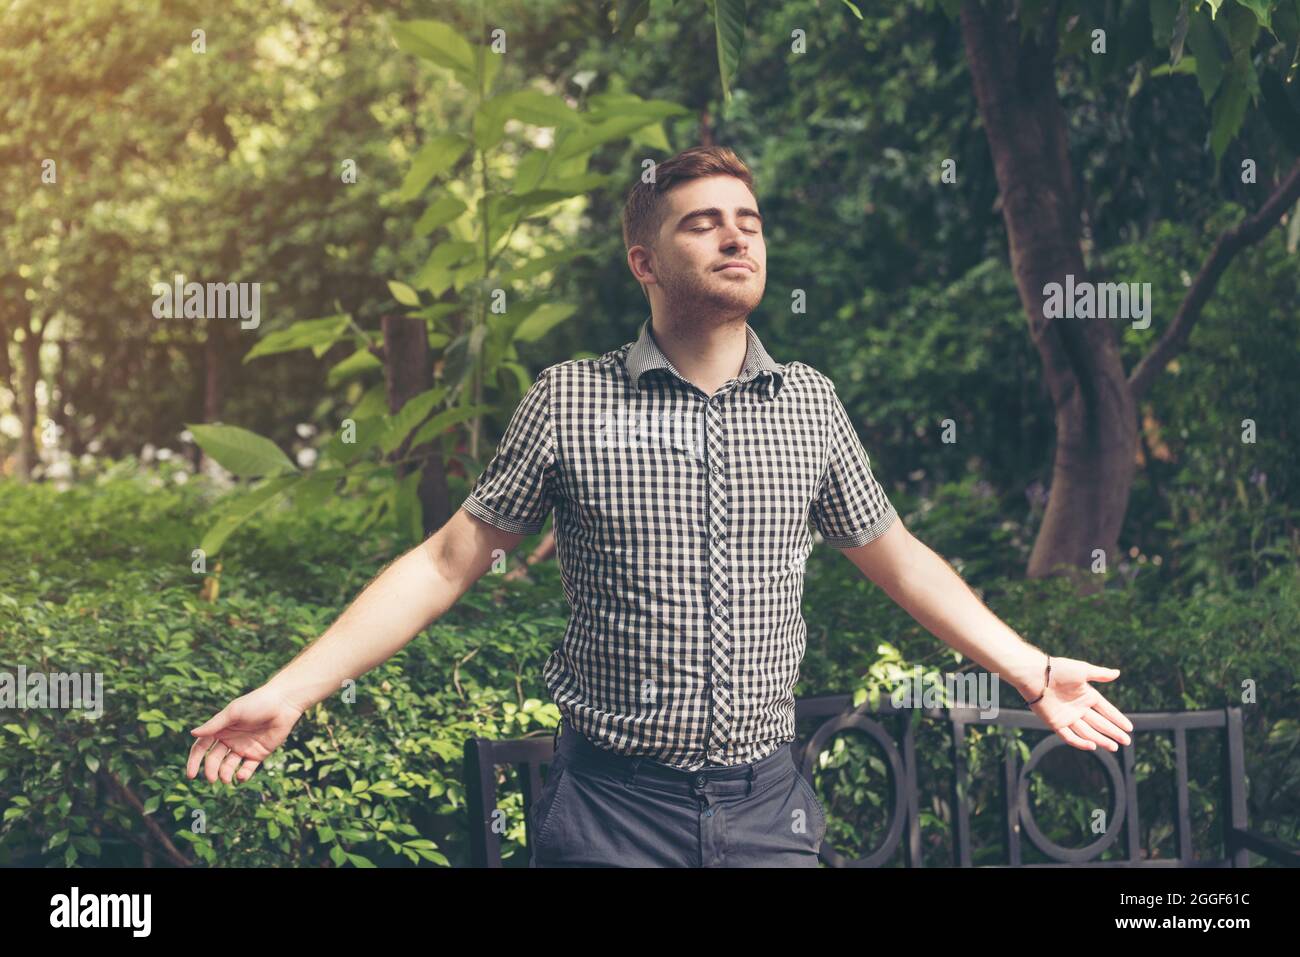 Man feeling relax while enjoy freedom in the park. Relaxation lifestyle concept. Stock Photo